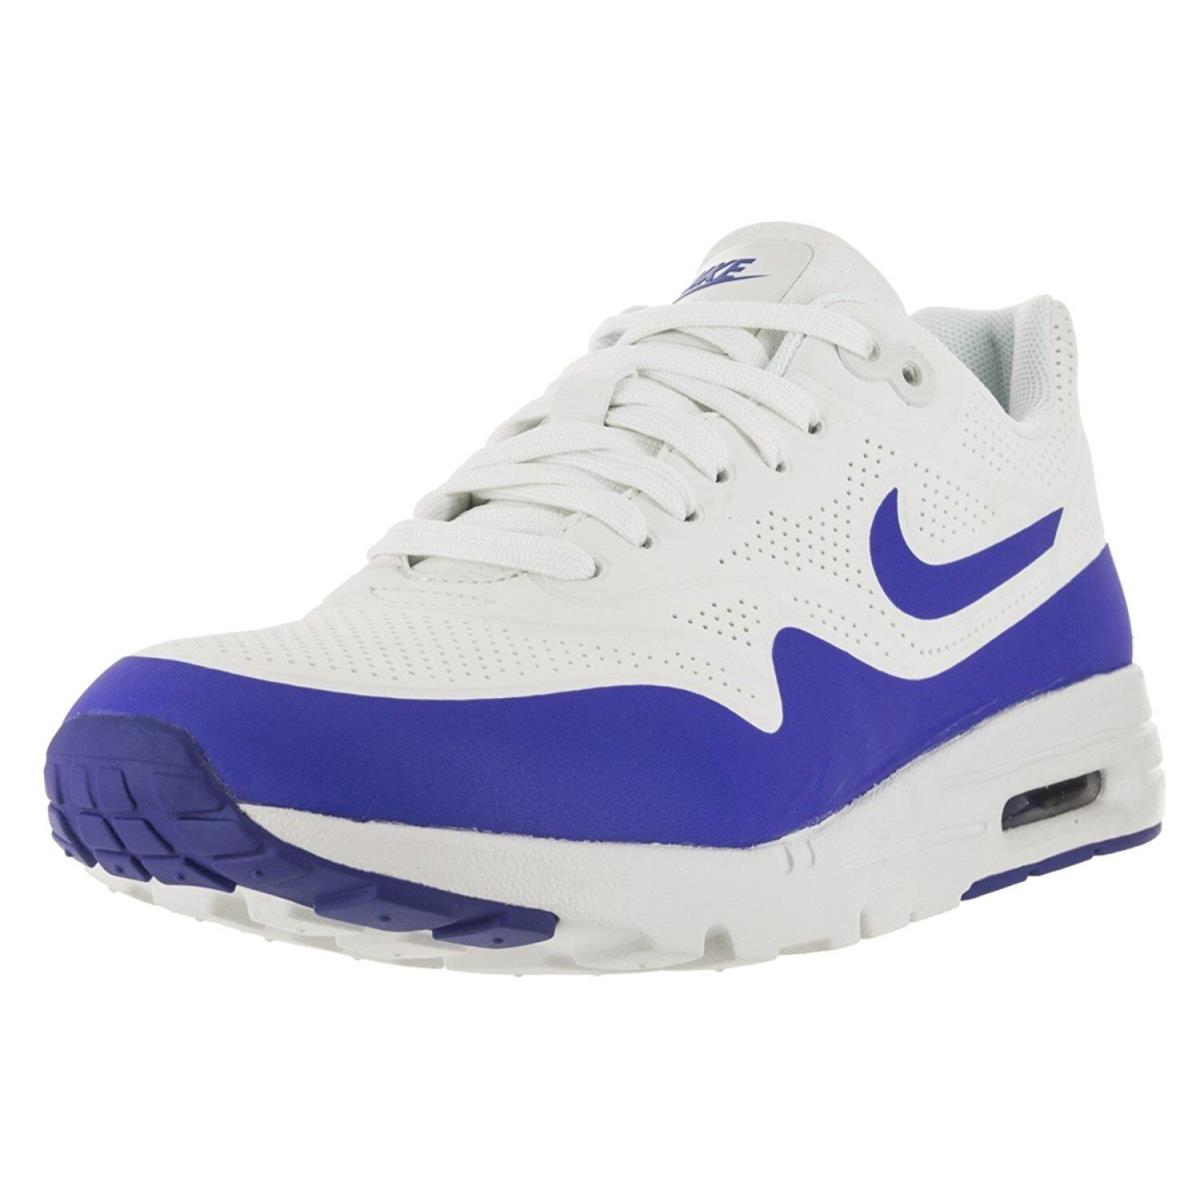 Women`s Nike Air Max 1 Ultra Moire Running Shoes 704995 100 Sizes 5.5-7 White/b